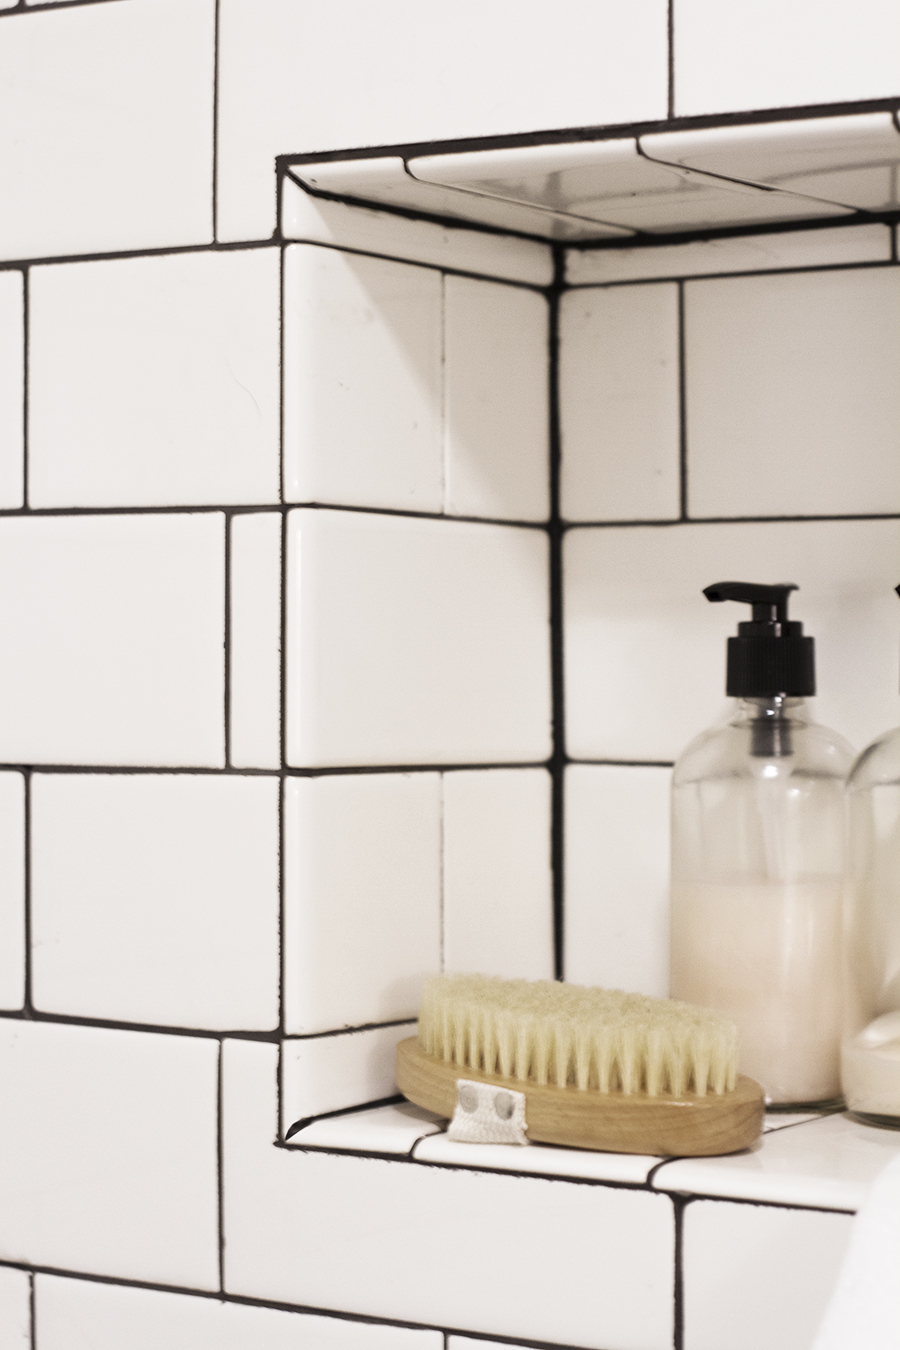 Try This : Add a Corner Shelf to your Shower - Deuce Cities Henhouse